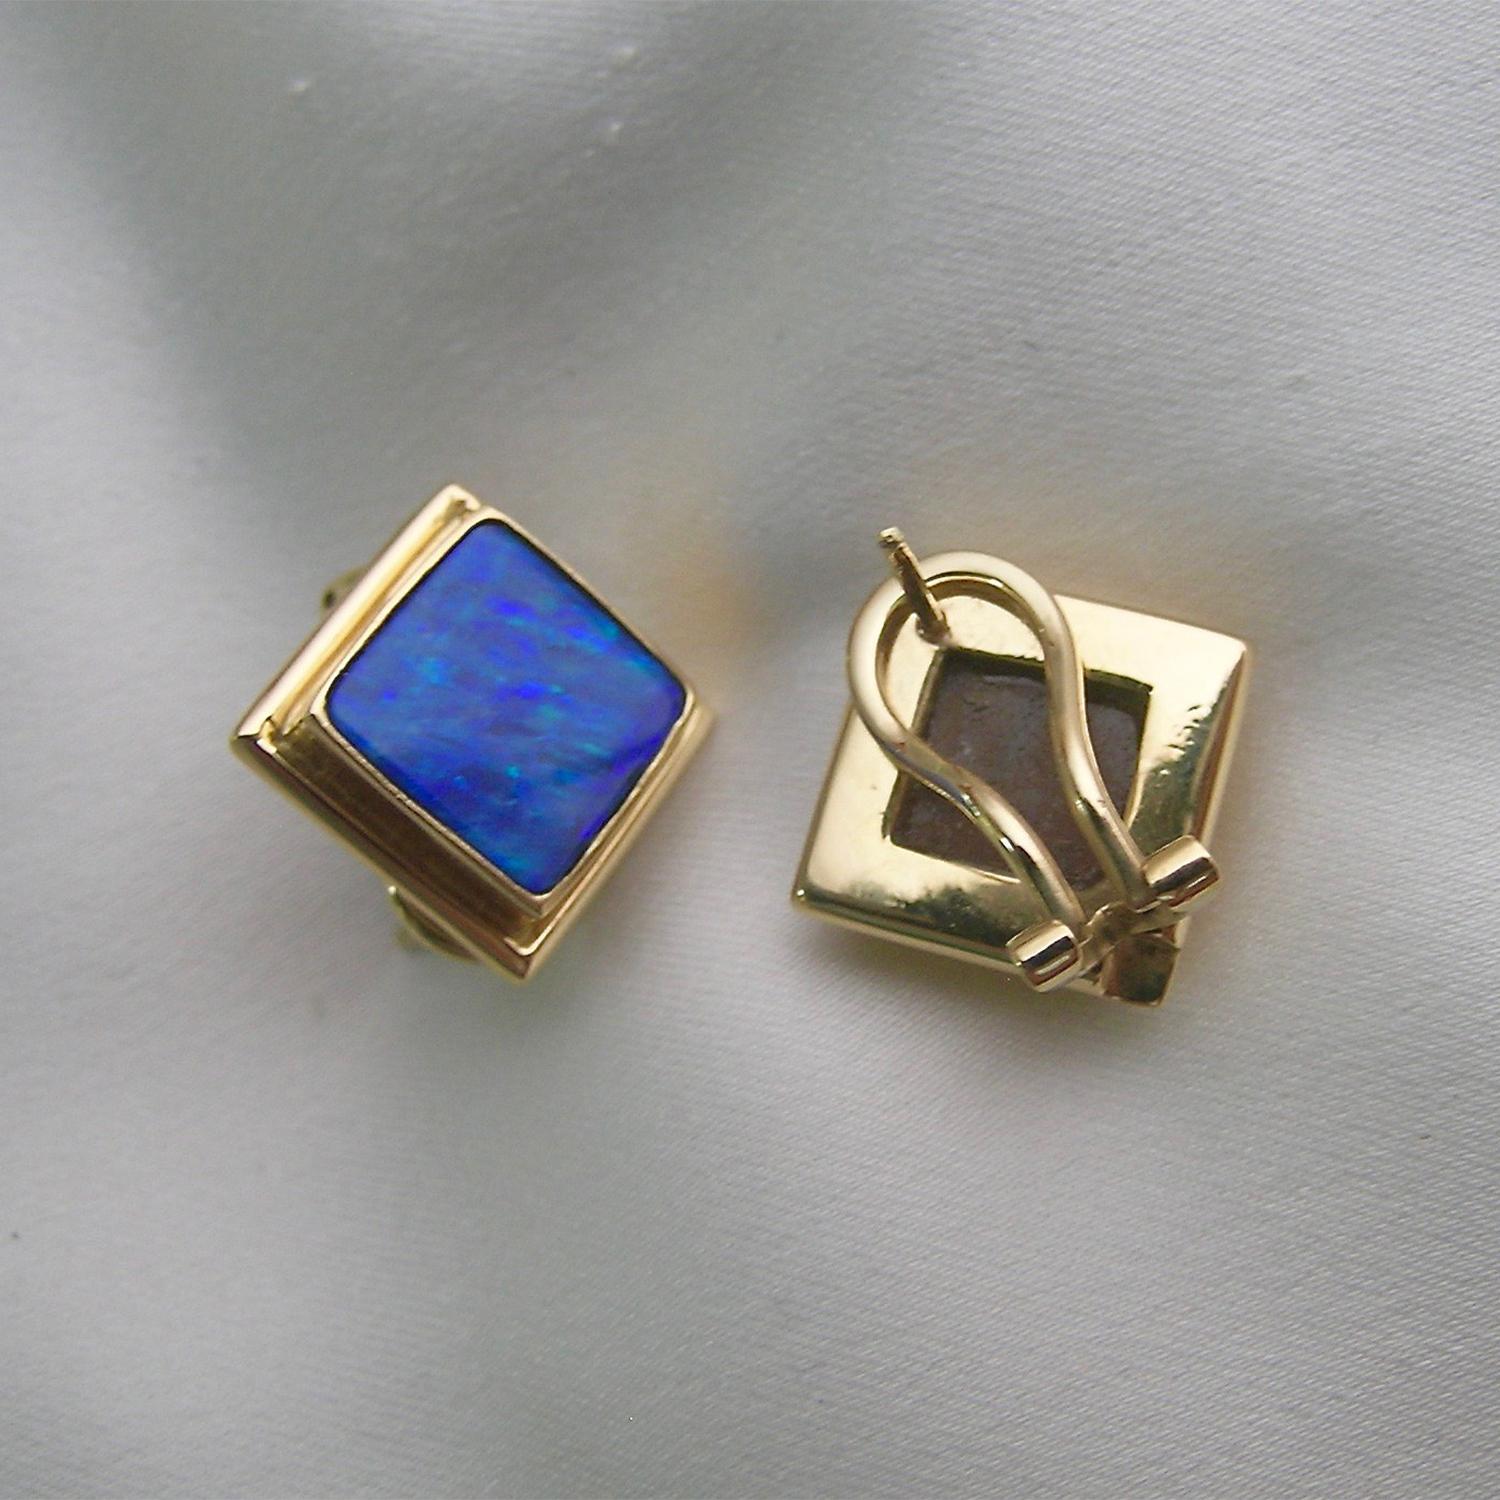 Simple, yet elegant,  these square opal earrings sit directly on the ear.  No diamonds makes them an everyday, casual piece of jewelry.  Light weight and colorful, using 12 carats of boulder opals.  We cut these opals to fit into our shape of